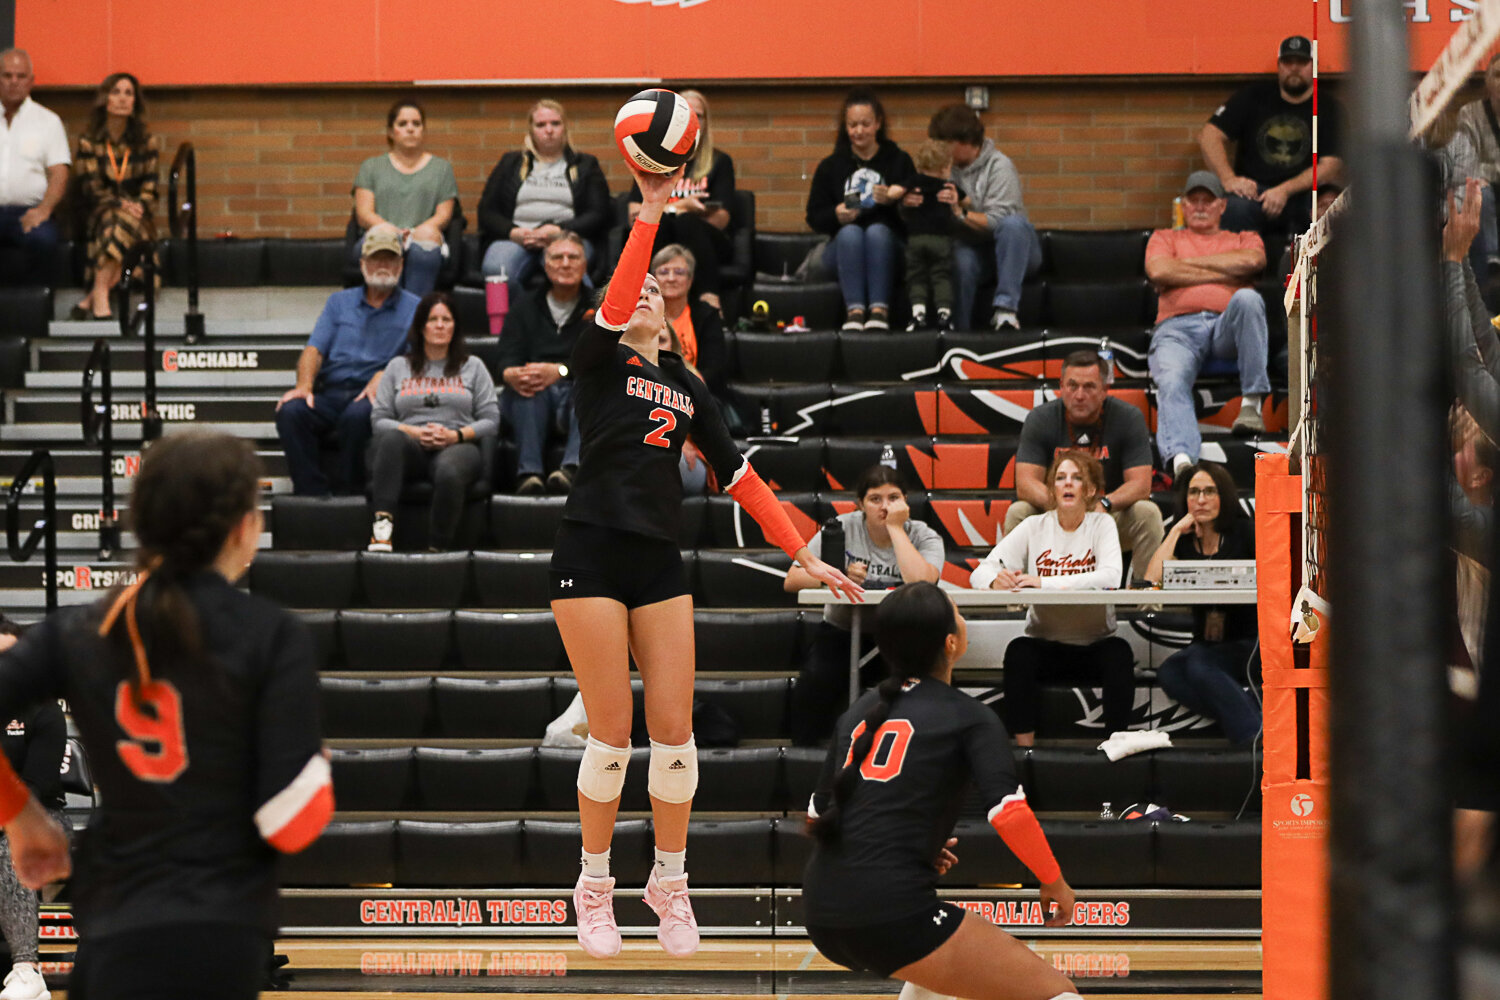 Lauren Wasson tips the ball over the net during the first set of Centralia's three-set win over W.F. West on Sept. 21.